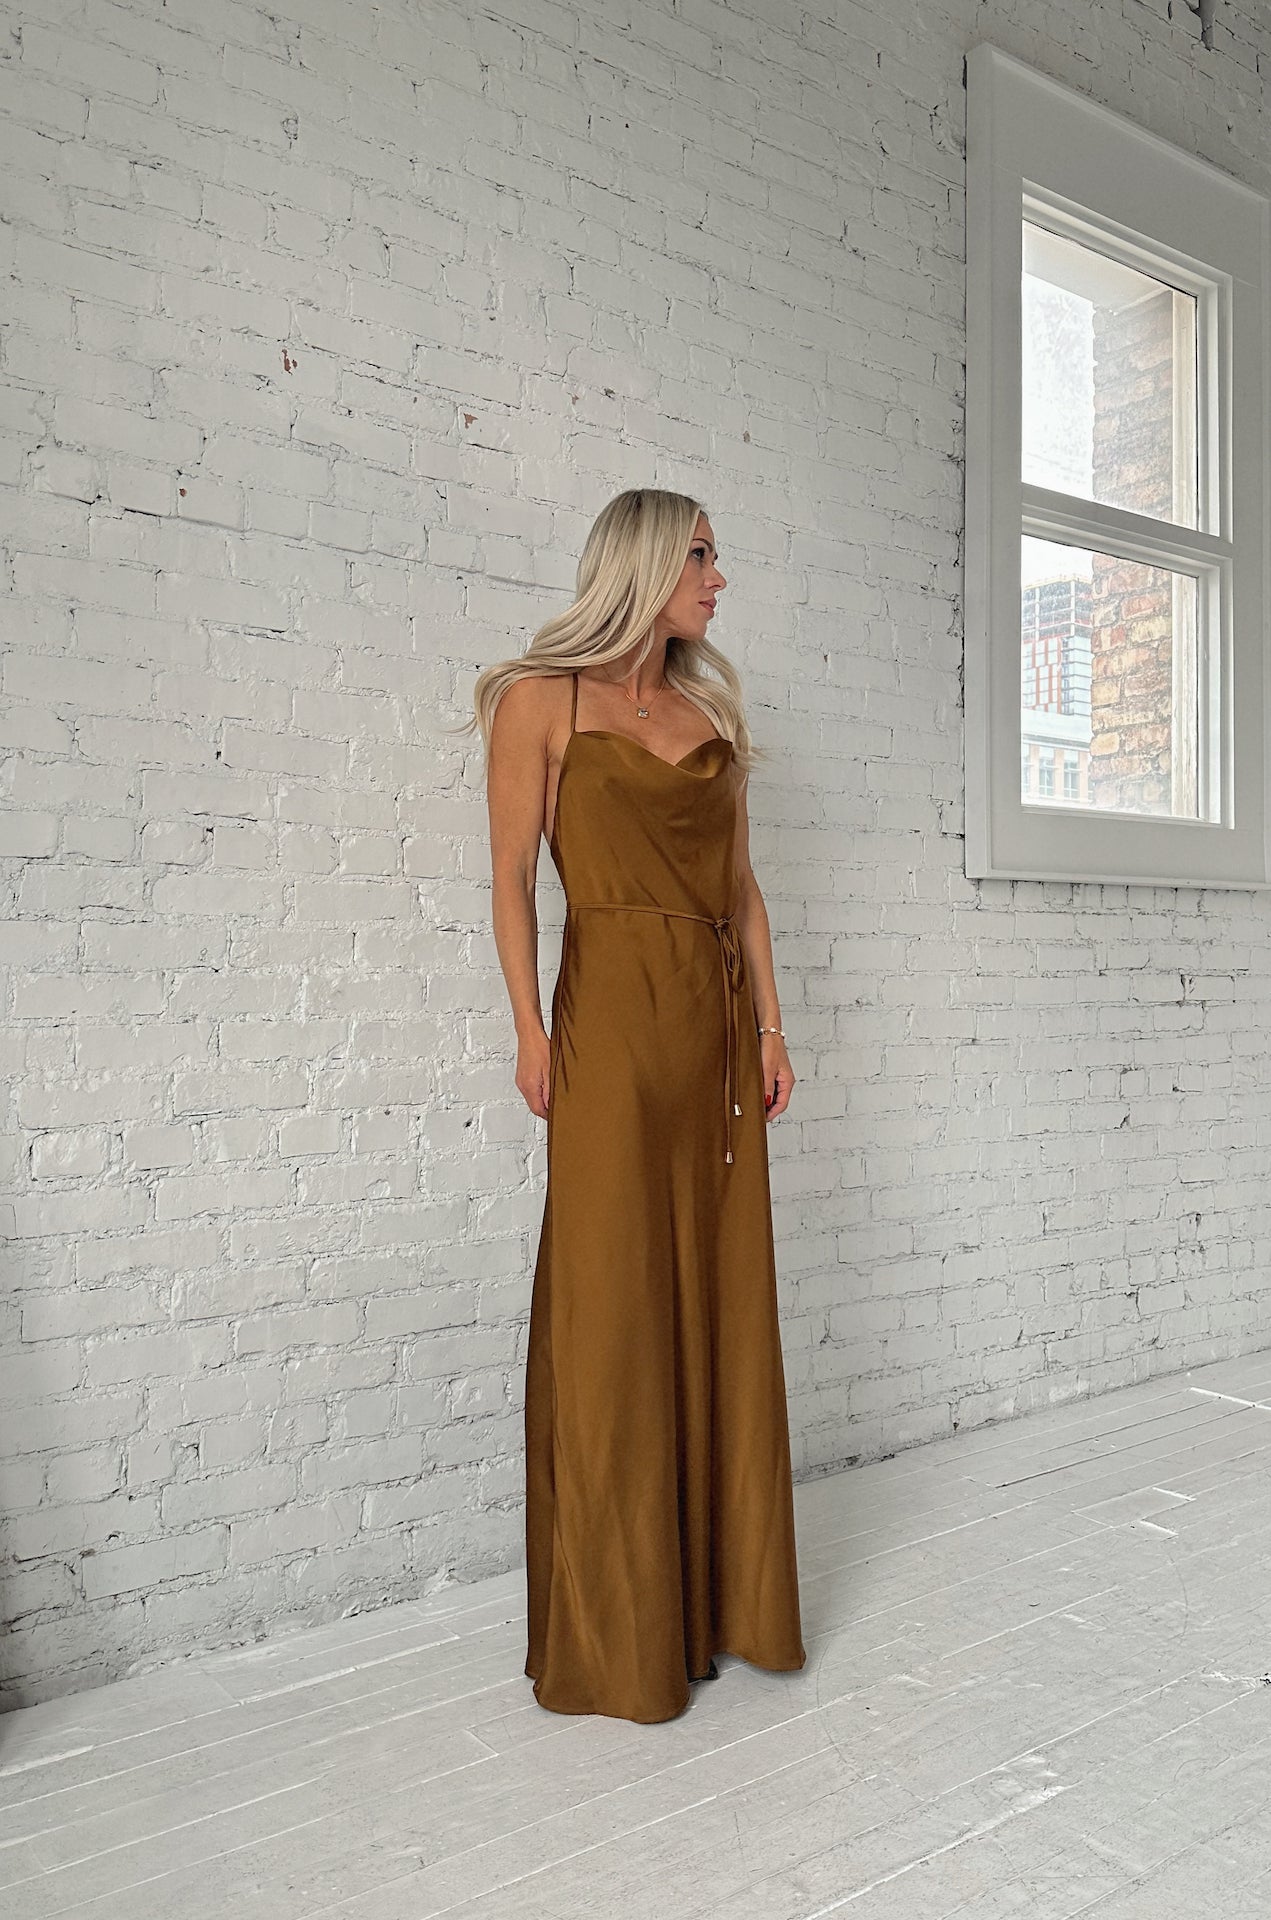 sleeveless bronze brown satin maxi dress with a cowl neckline and criss cross back